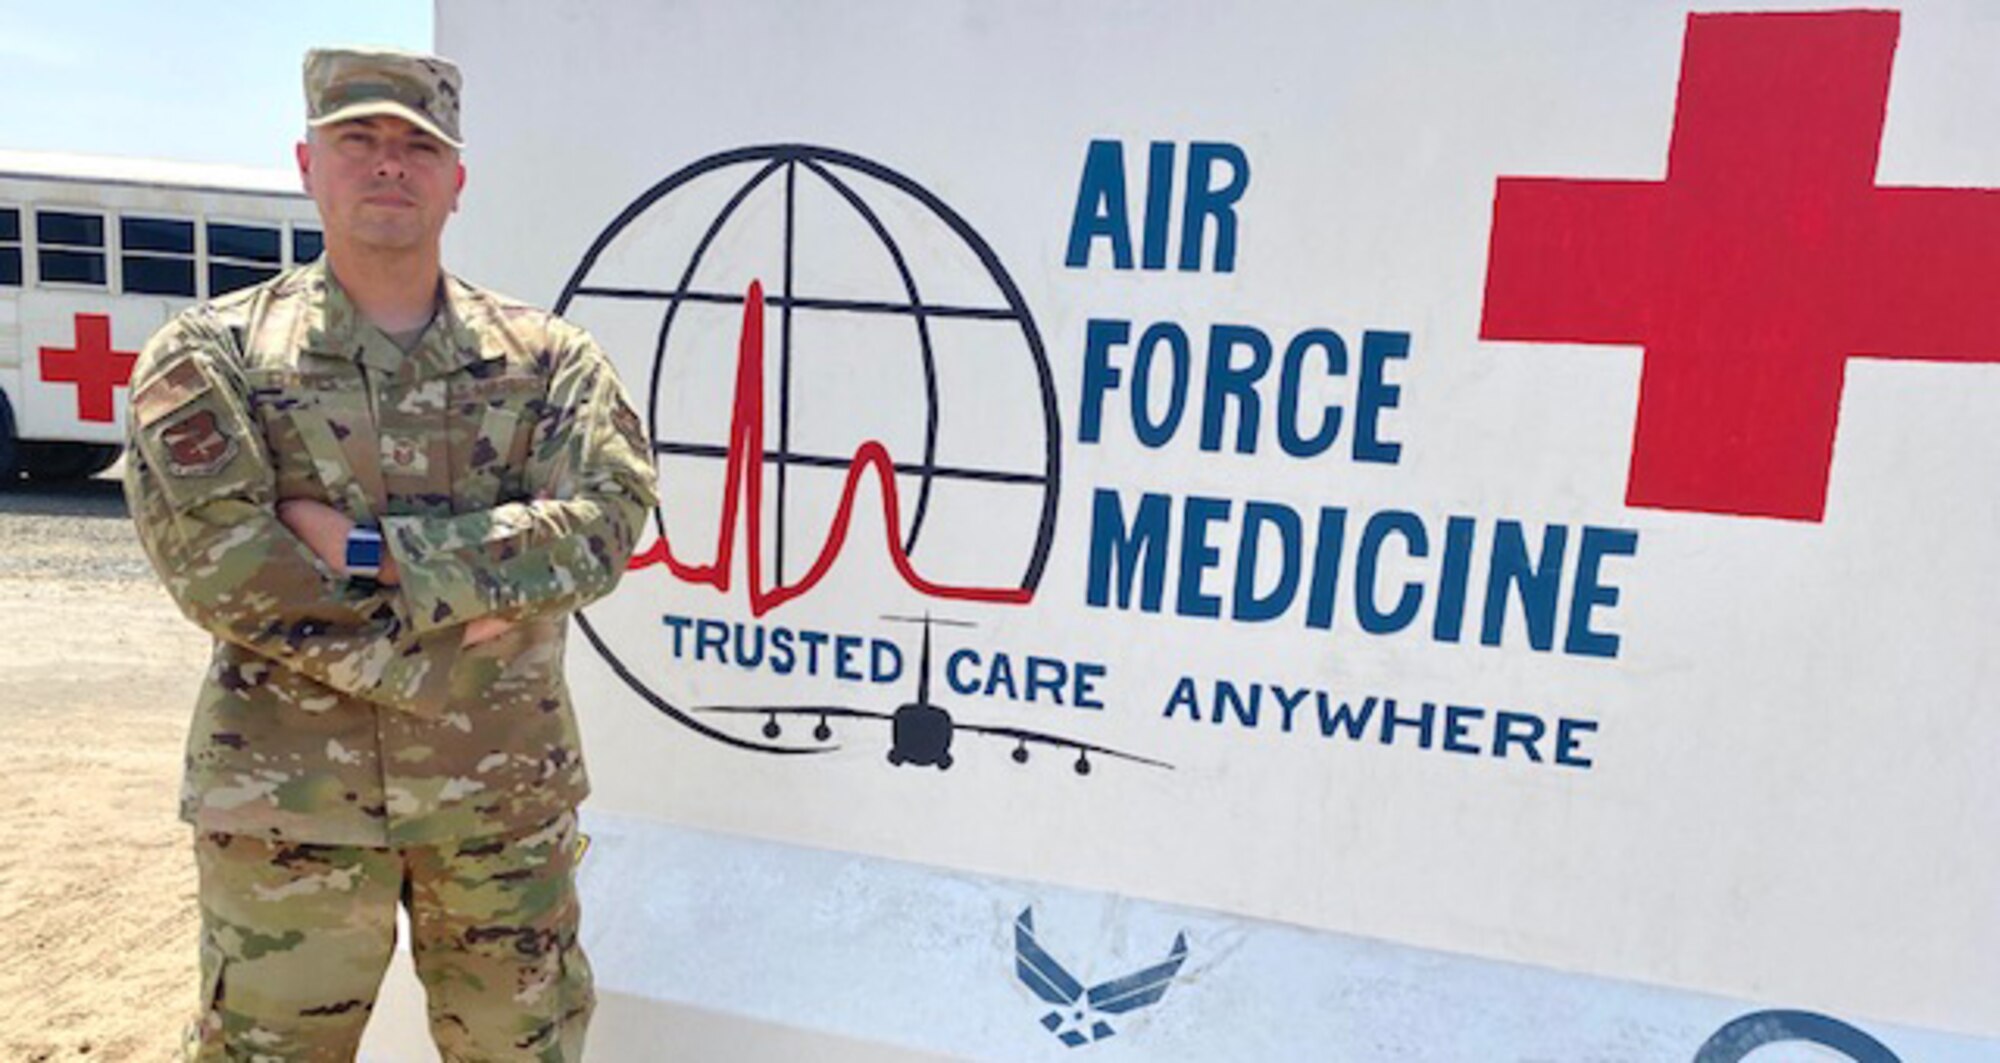 Master Sgt. David Flores, 380th Expeditionary Medical Group first sergeant, is responsible for the health, morale, conduct, and welfare of all Airmen in his unit. Flores, pictured in front of his unit’s mural, June 16, 2020, is one of five Reservists who deployed here, all working in the same capacity in various units from the 301st Fighter Wing at Naval Air Station Joint Reserve Base, Fort Worth, Texas. (U.S. Air Force photo by Tech. Sgt. Melissa Harvey)